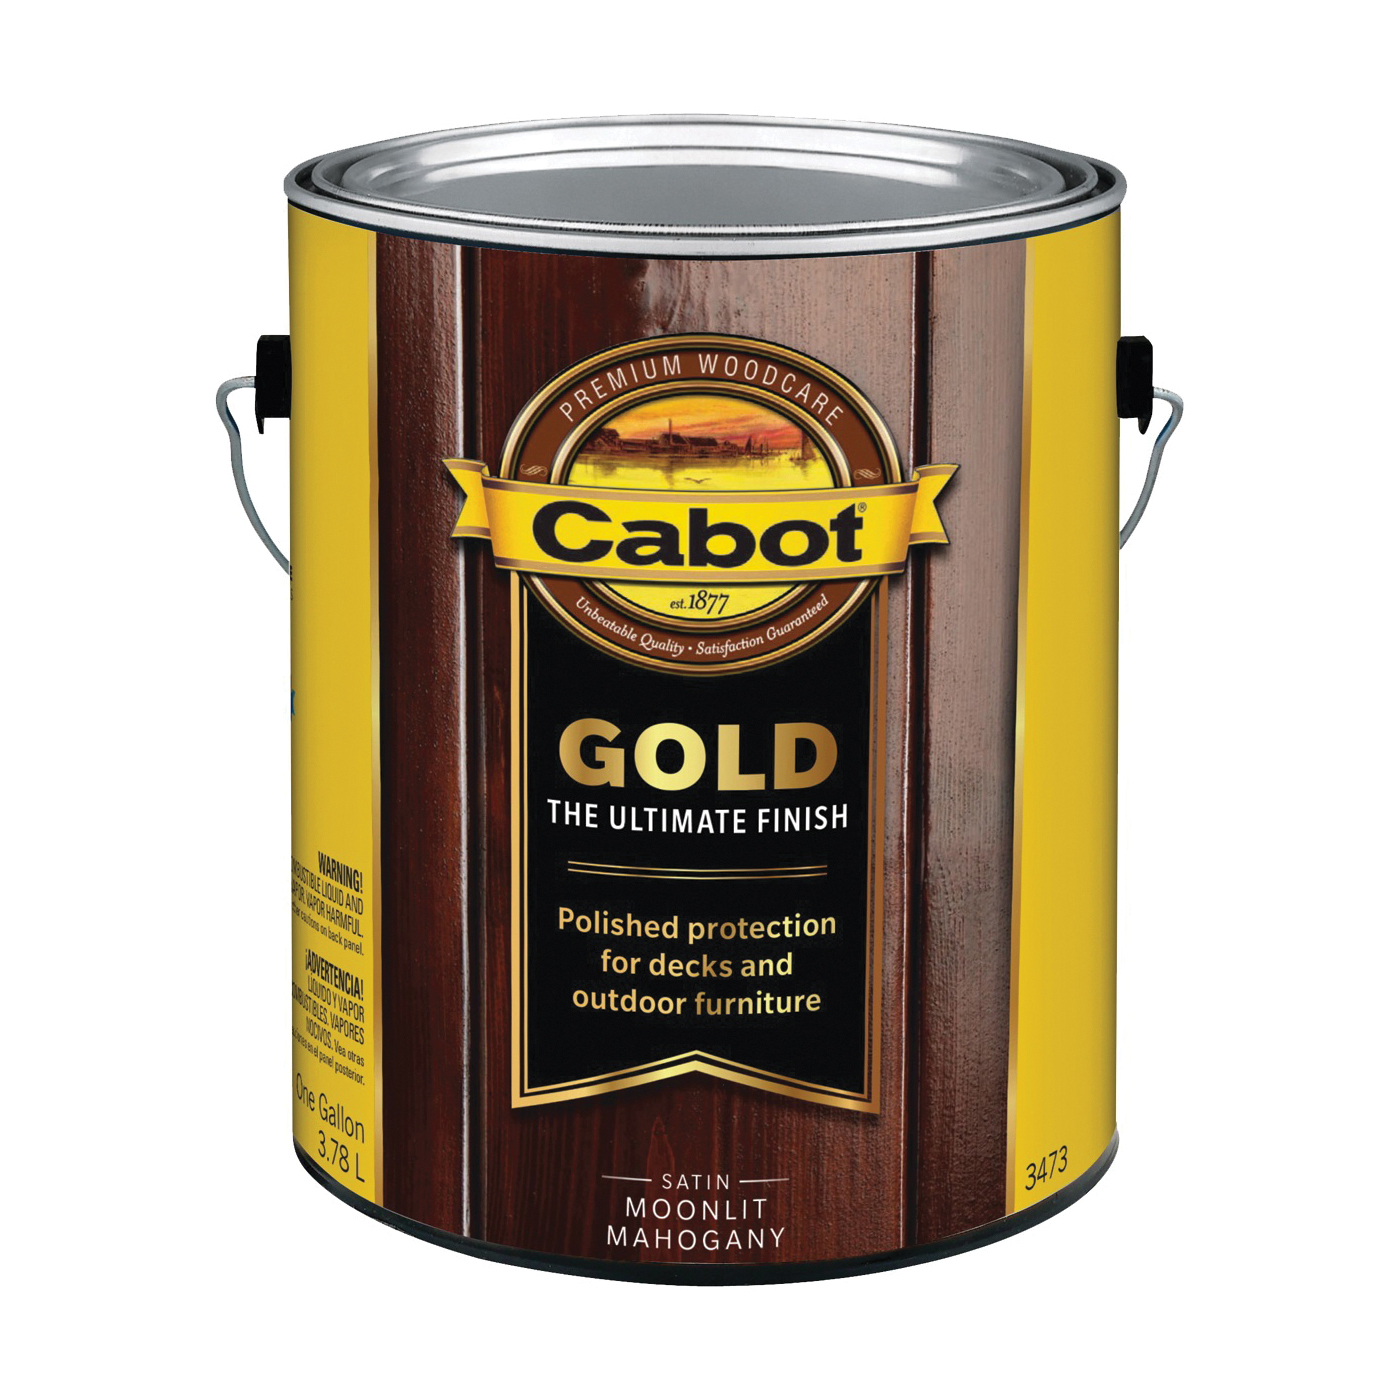 Cabot 140.0003473.007 Wood Conditioning Stain, Gold Satin, Liquid, Moonlit Mahogany, 1 gal, Can - 1